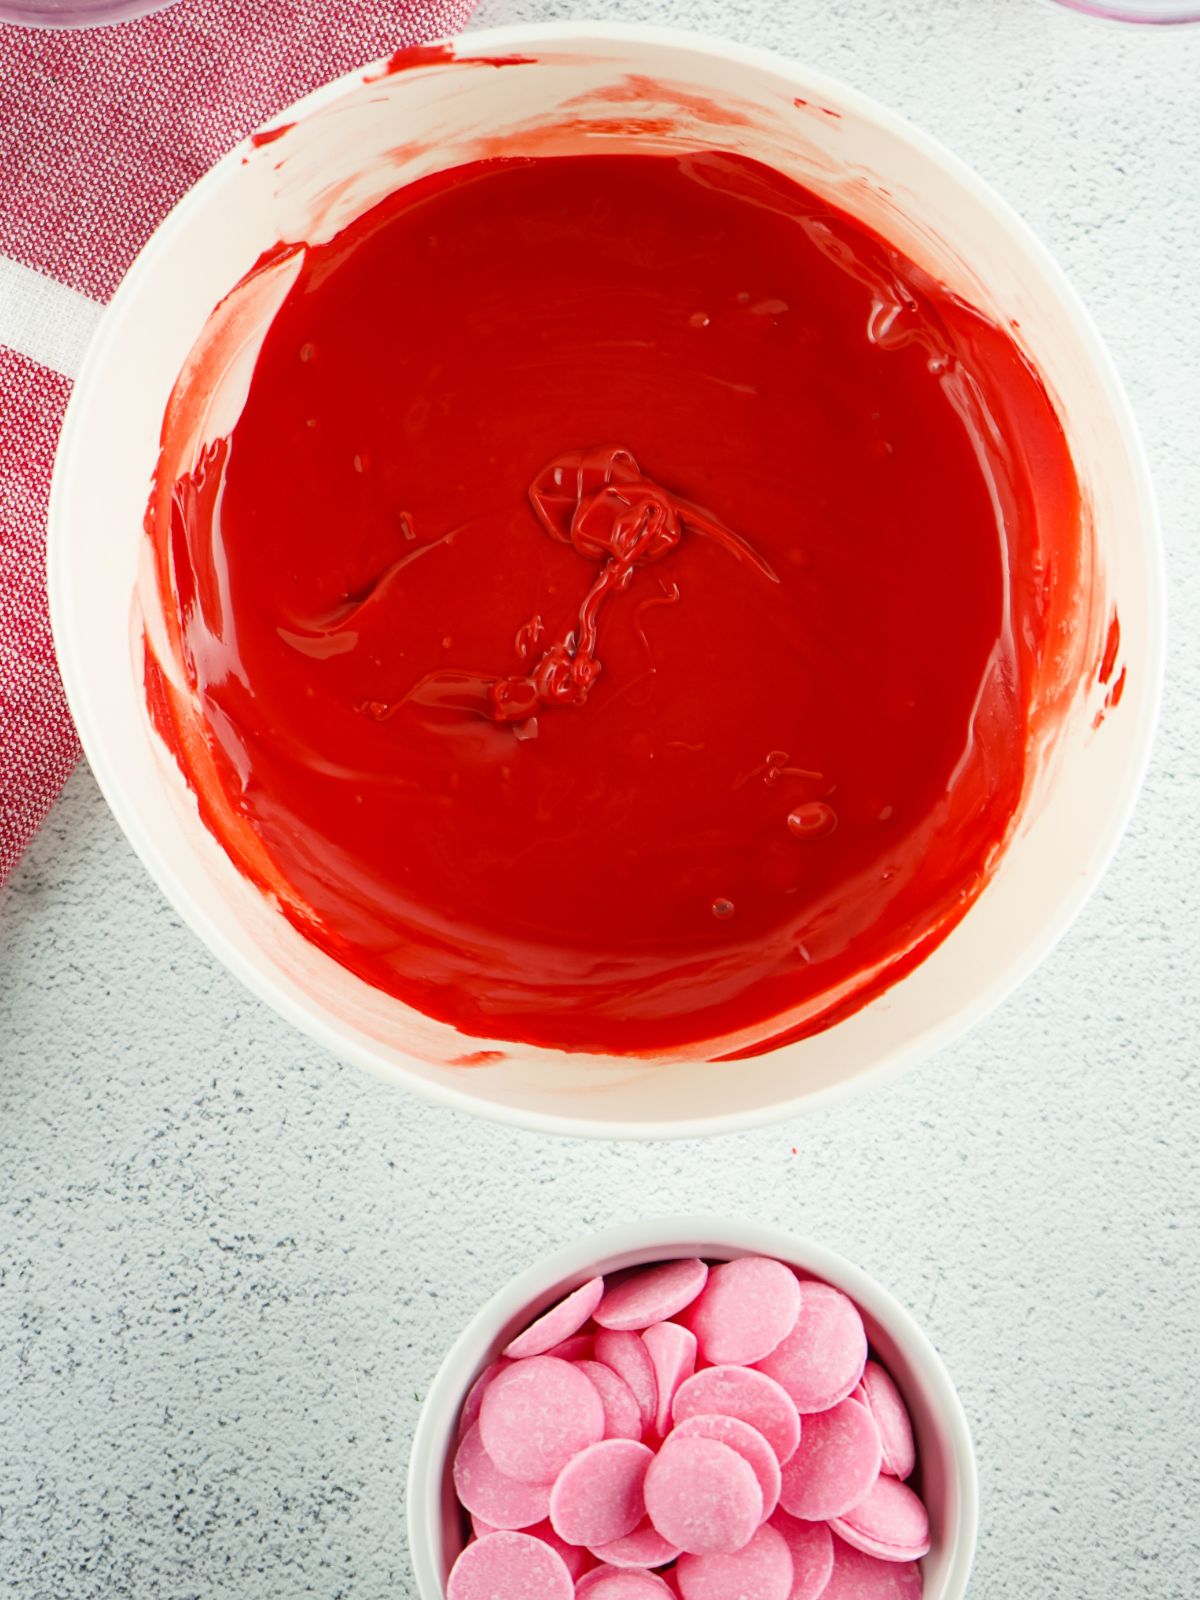 Red melted candy melts in a glass bowl.